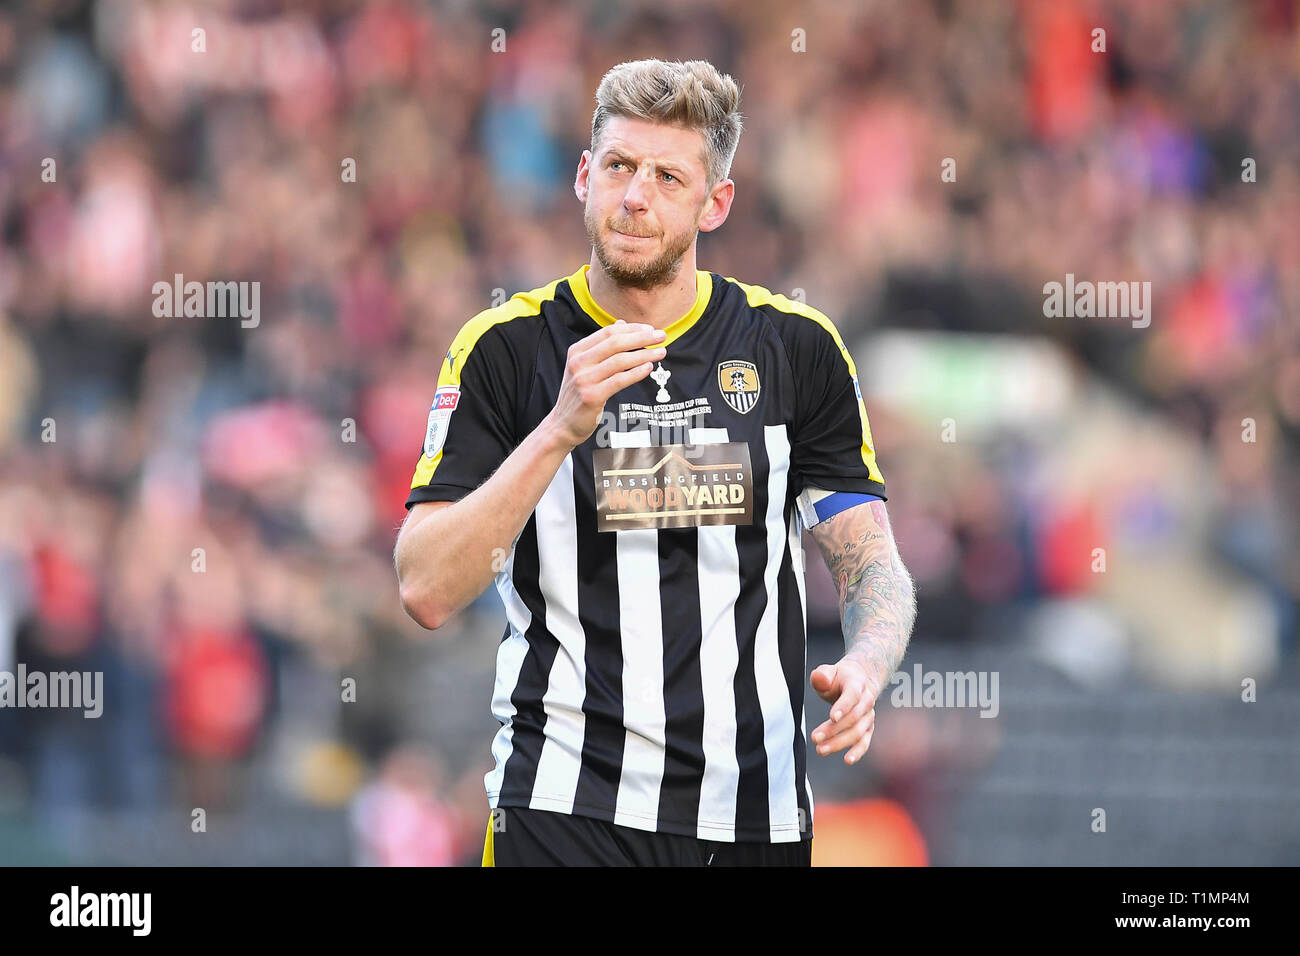 23rd March 2019 , Meadow Lane, Nottingham, England; Sky Bet League Two, Notts County vs Exeter City ; Jon Stead (30) of Notts County   Credit Jon Hobley/News Images Stock Photo